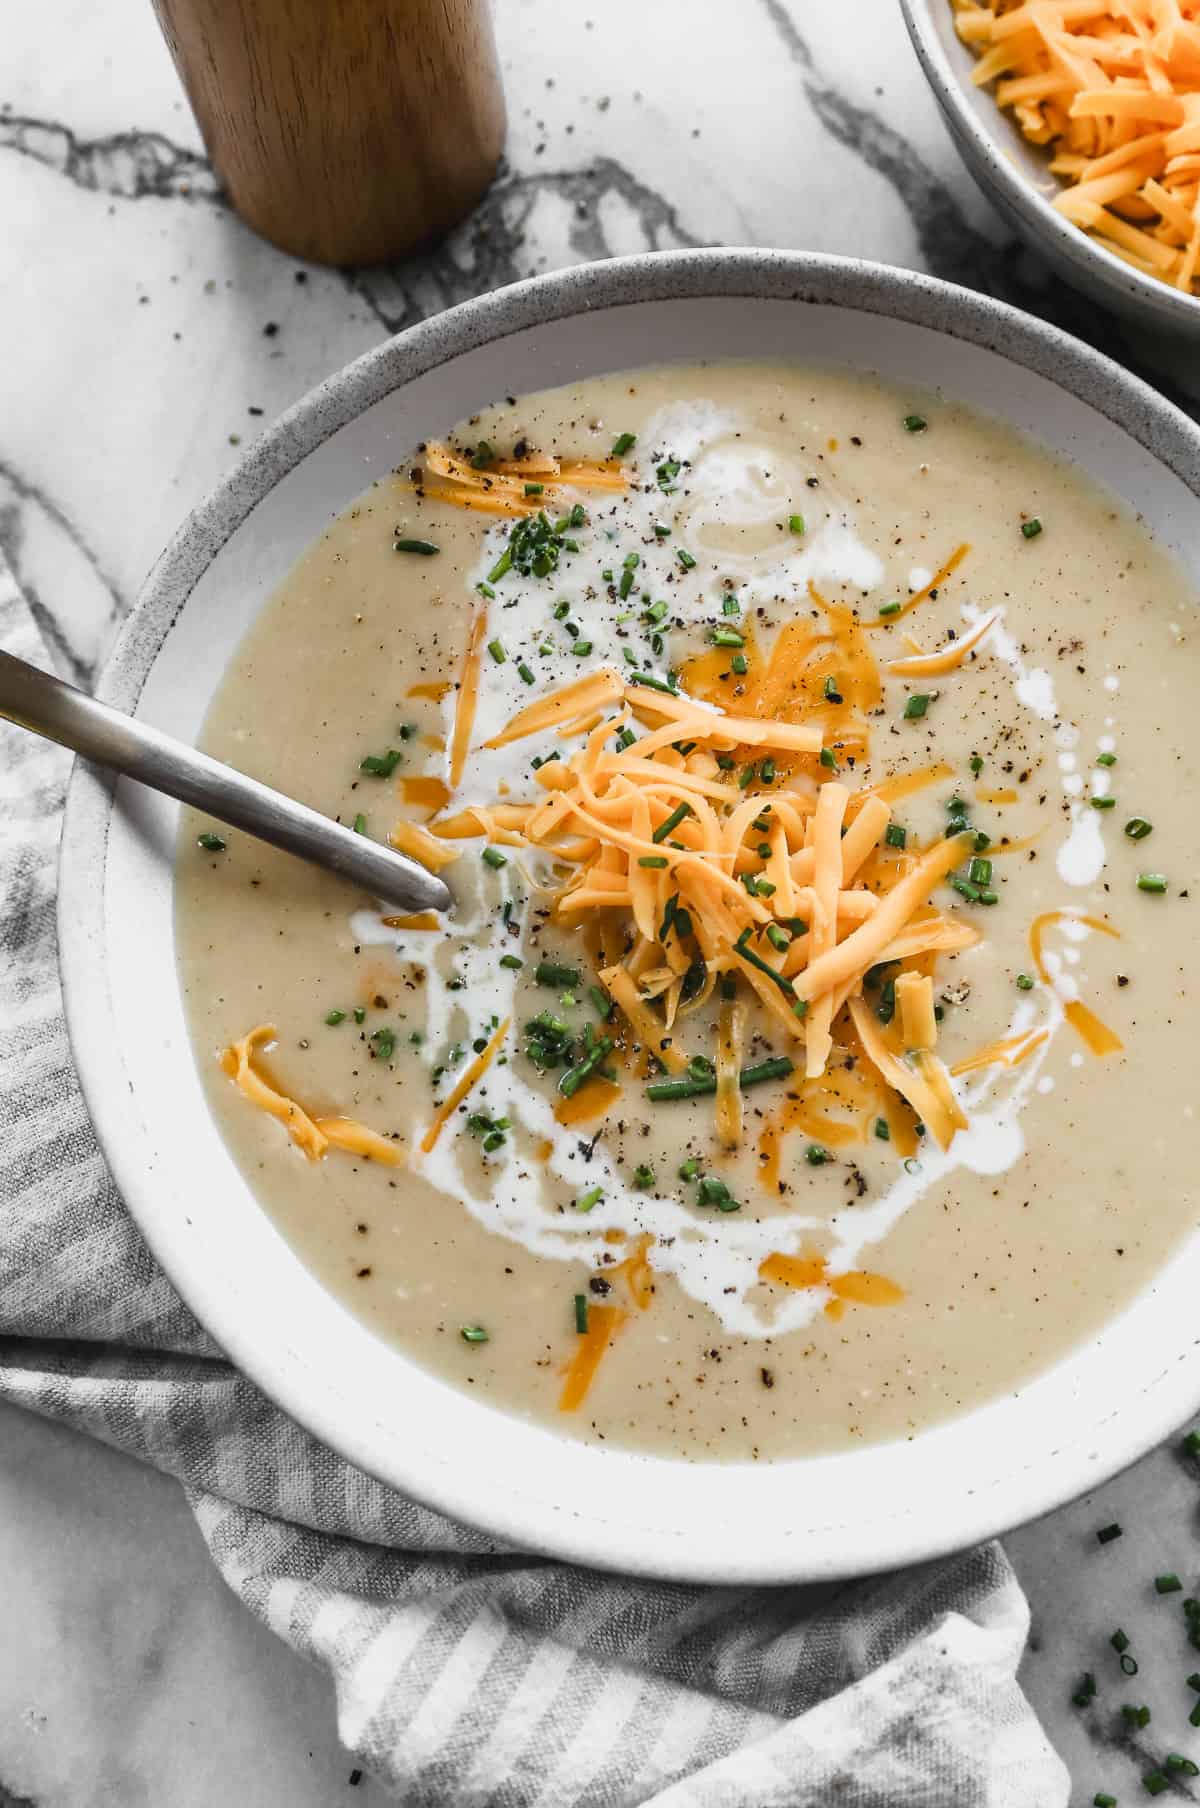 An easy Roasted Cauliflower Soup recipe topped with shredded cheese and chives.